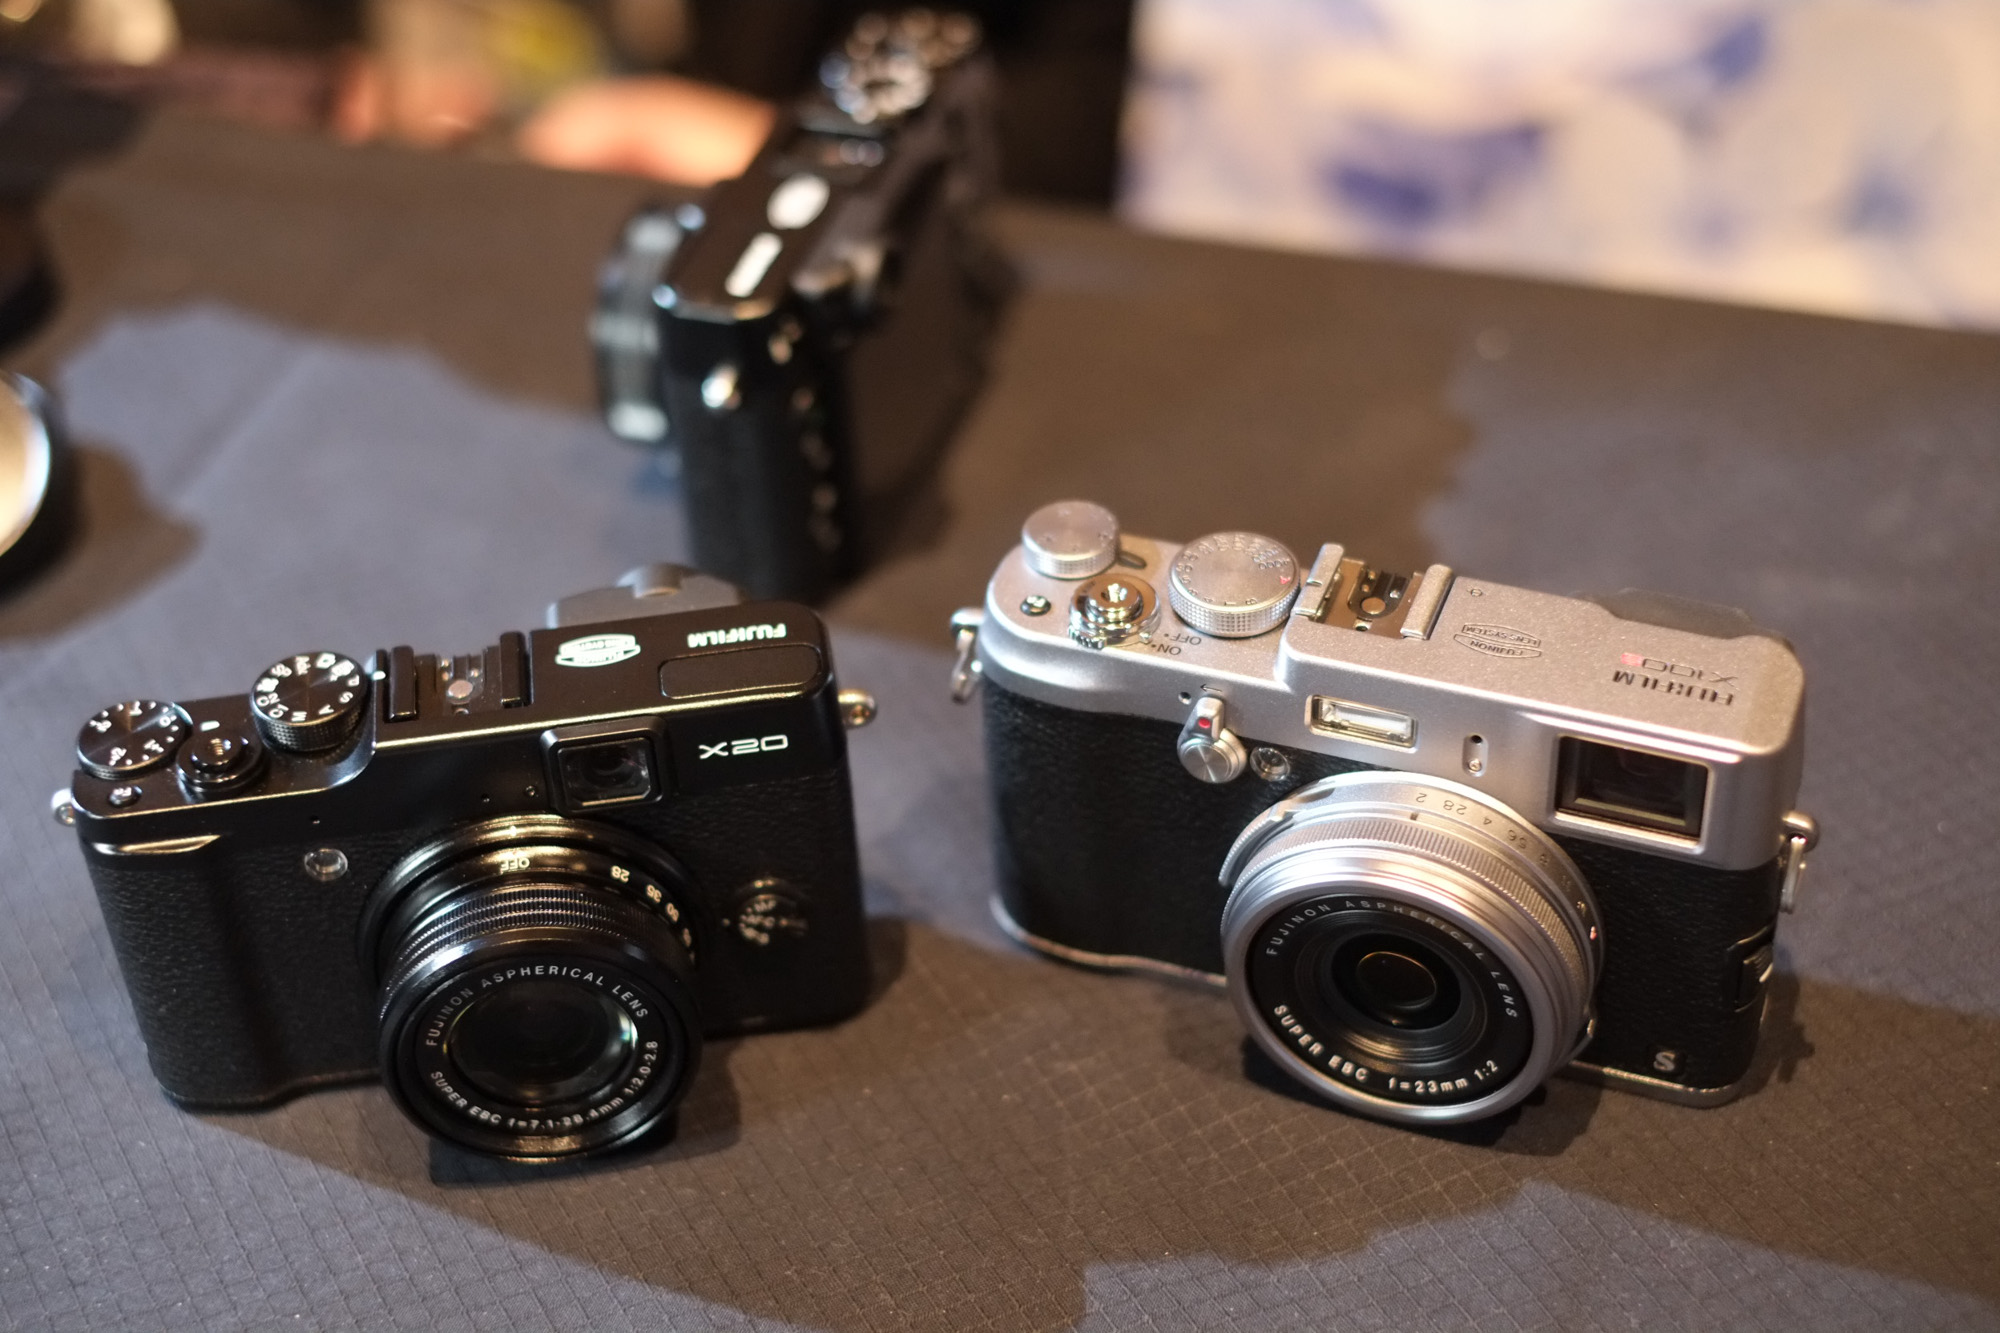 Fujifilm Unveils the Long Awaited X20 and X100s